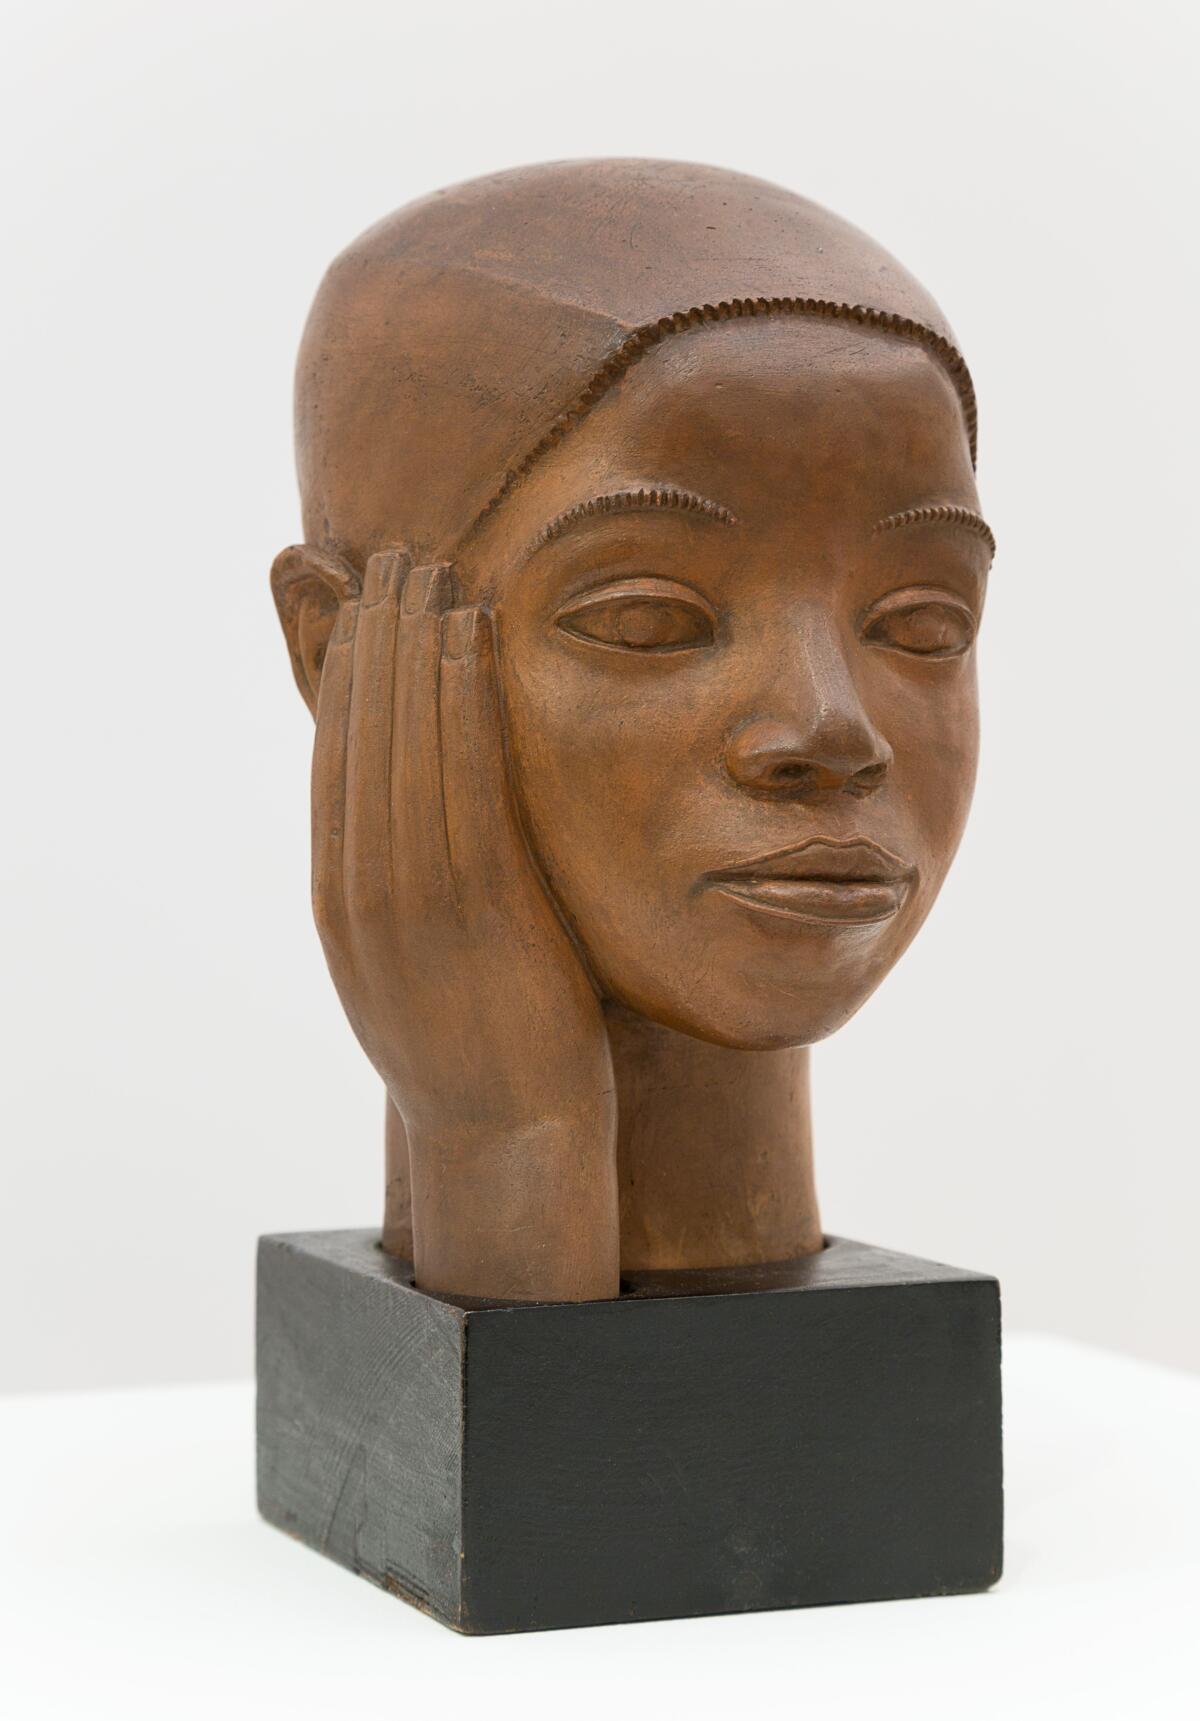 A stylized sculpture from the 1930s shows a Black boy holding his palm to his face as if lost in thought.